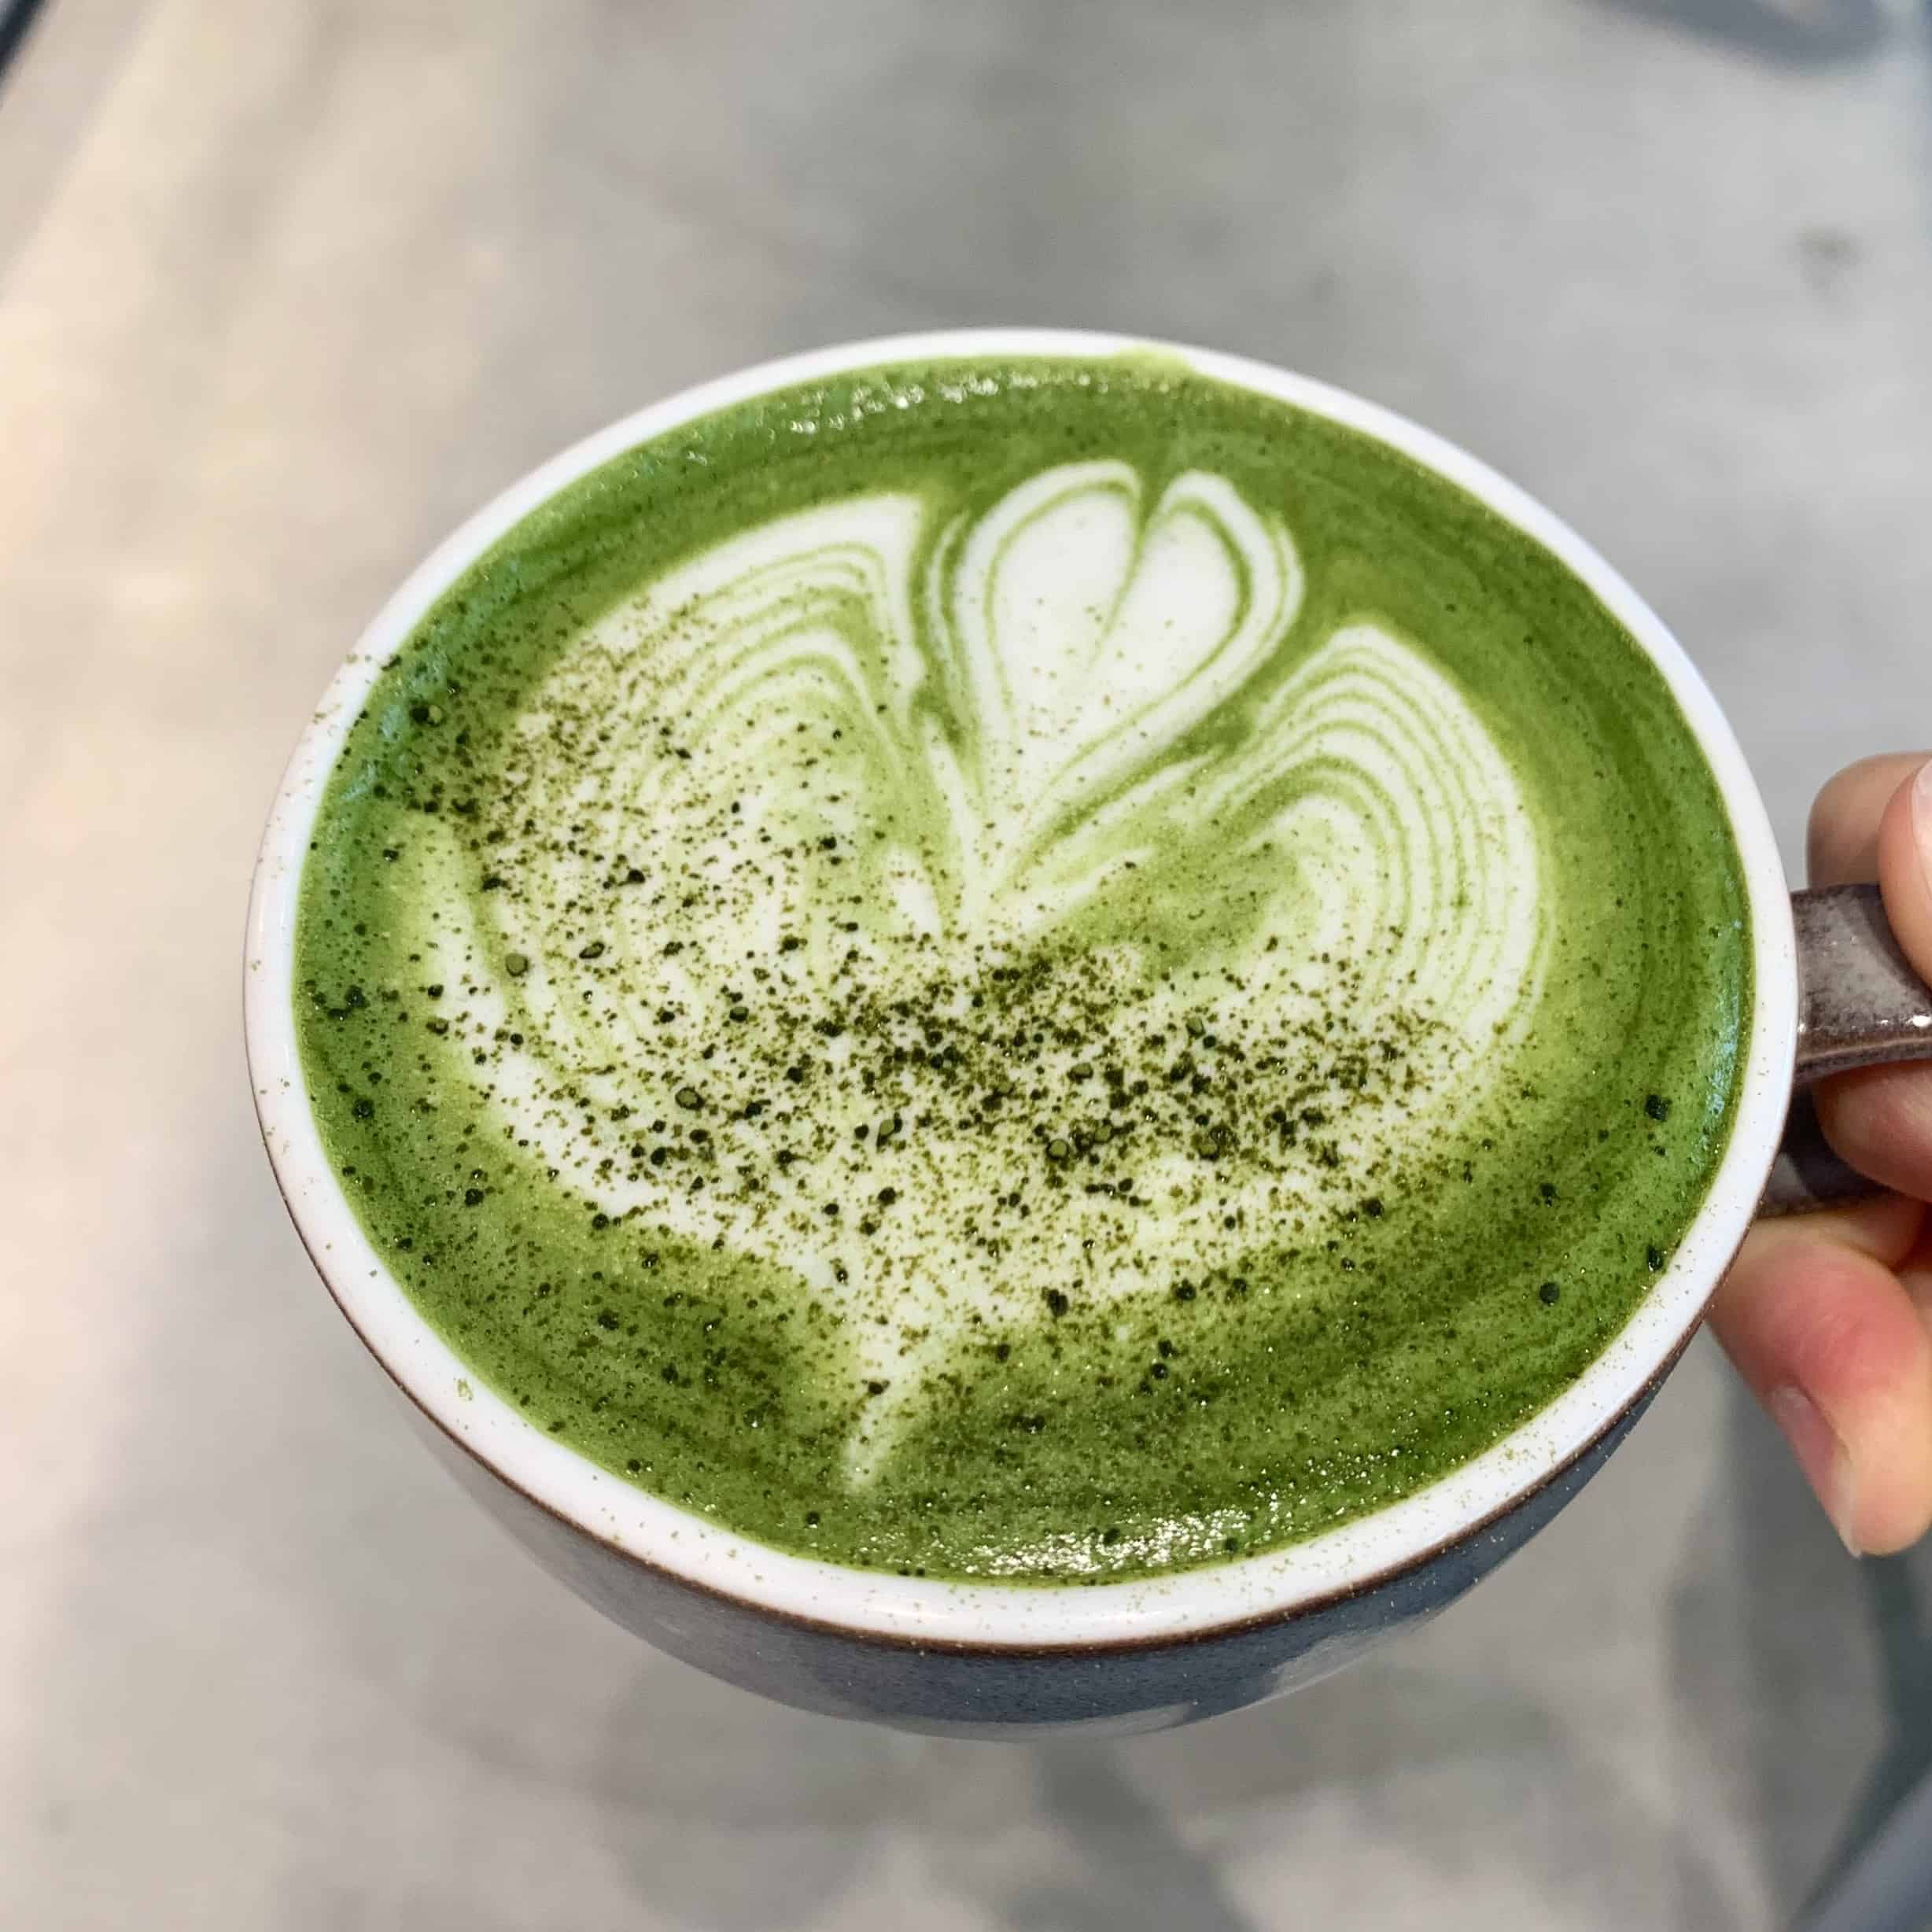 A vegan matcha latte from Everysoy